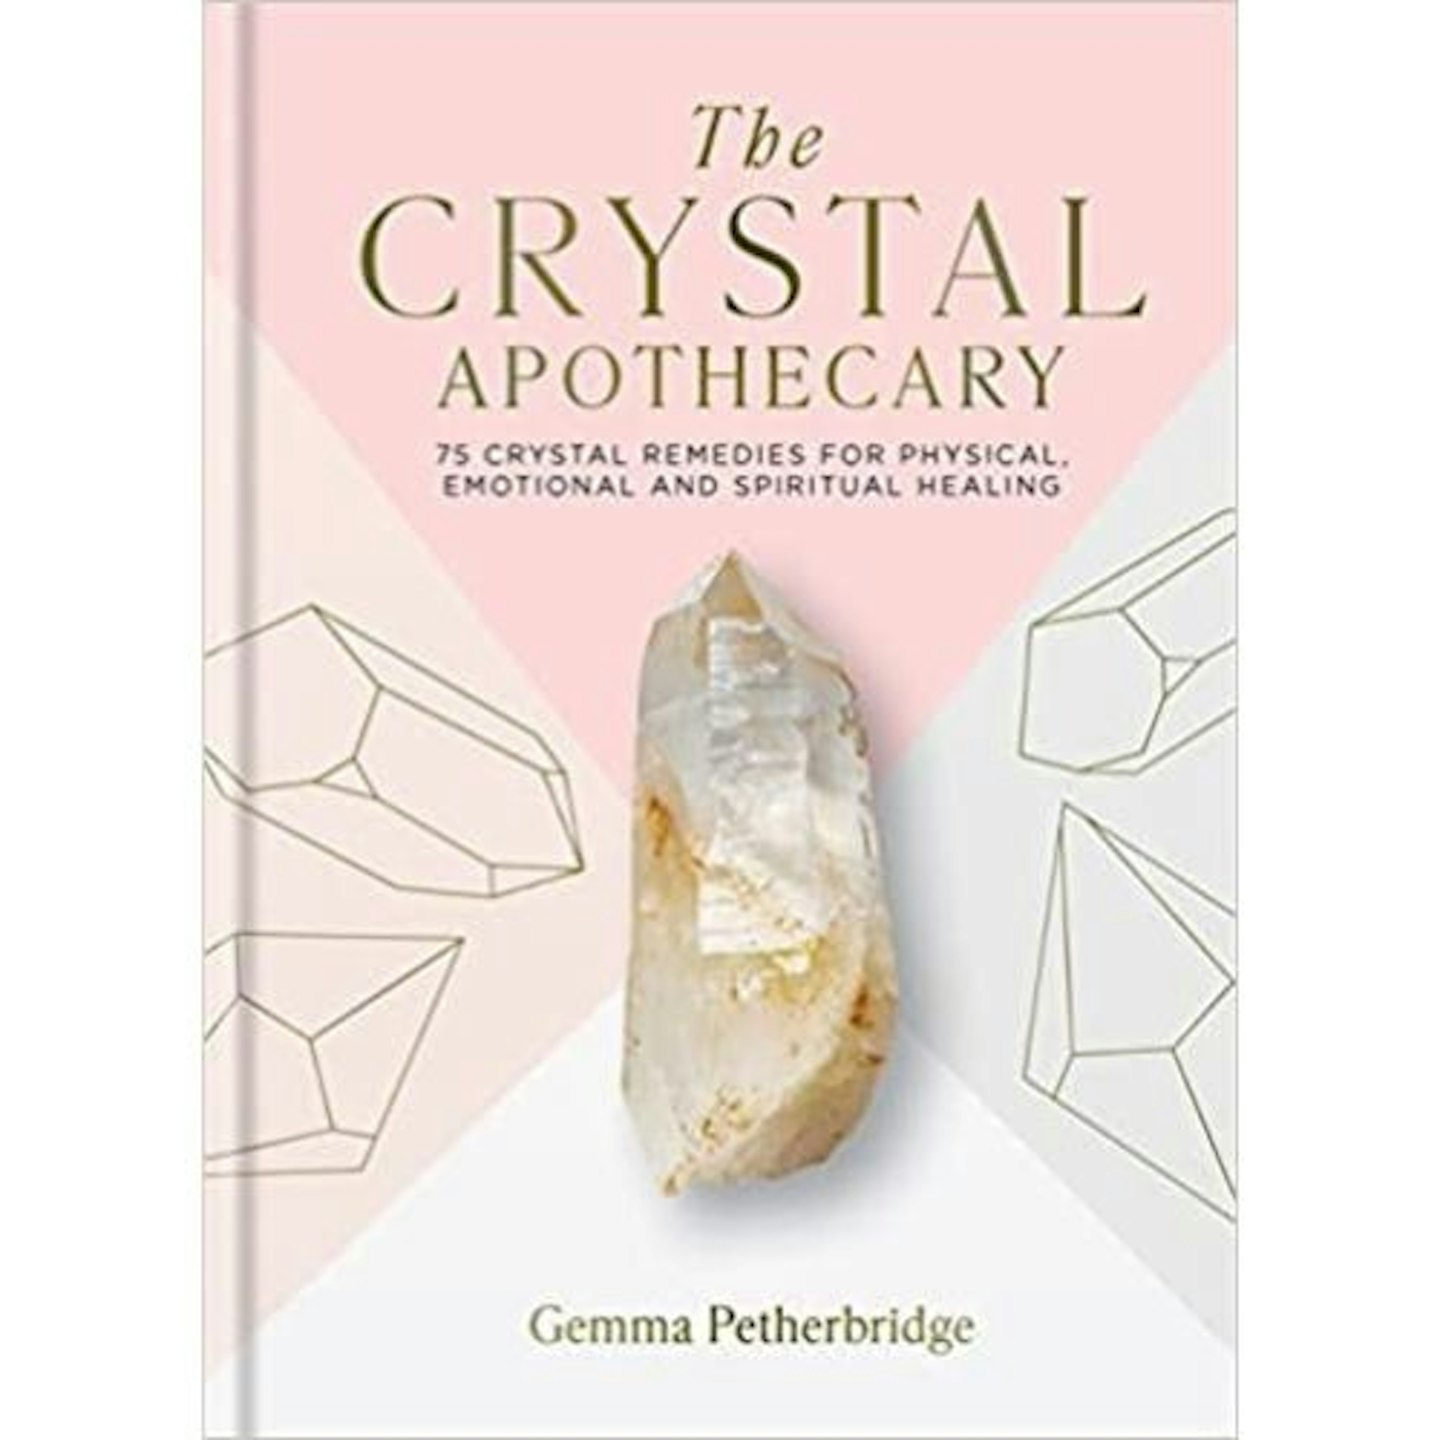 The Crystal Apothecary: 75 Crystal Remedies For Physical, Emotional and Spiritual Healing